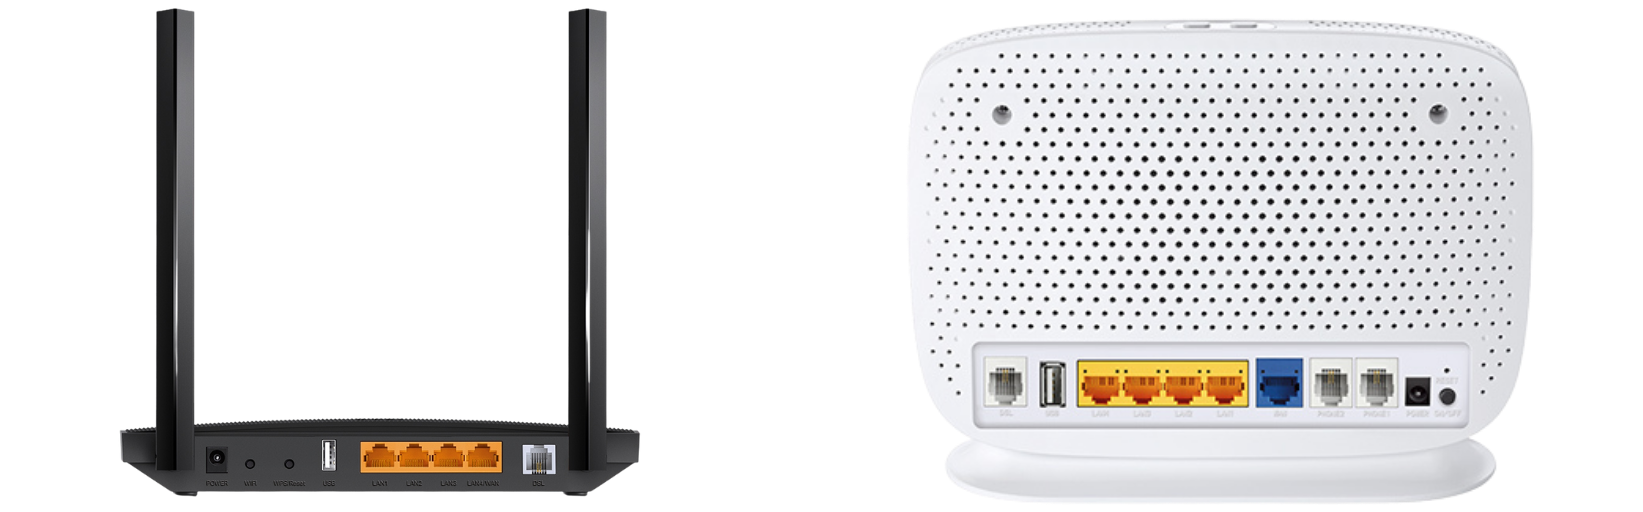 Rear of the MATE TP-Link modem/routers - VR400 and VR1600v